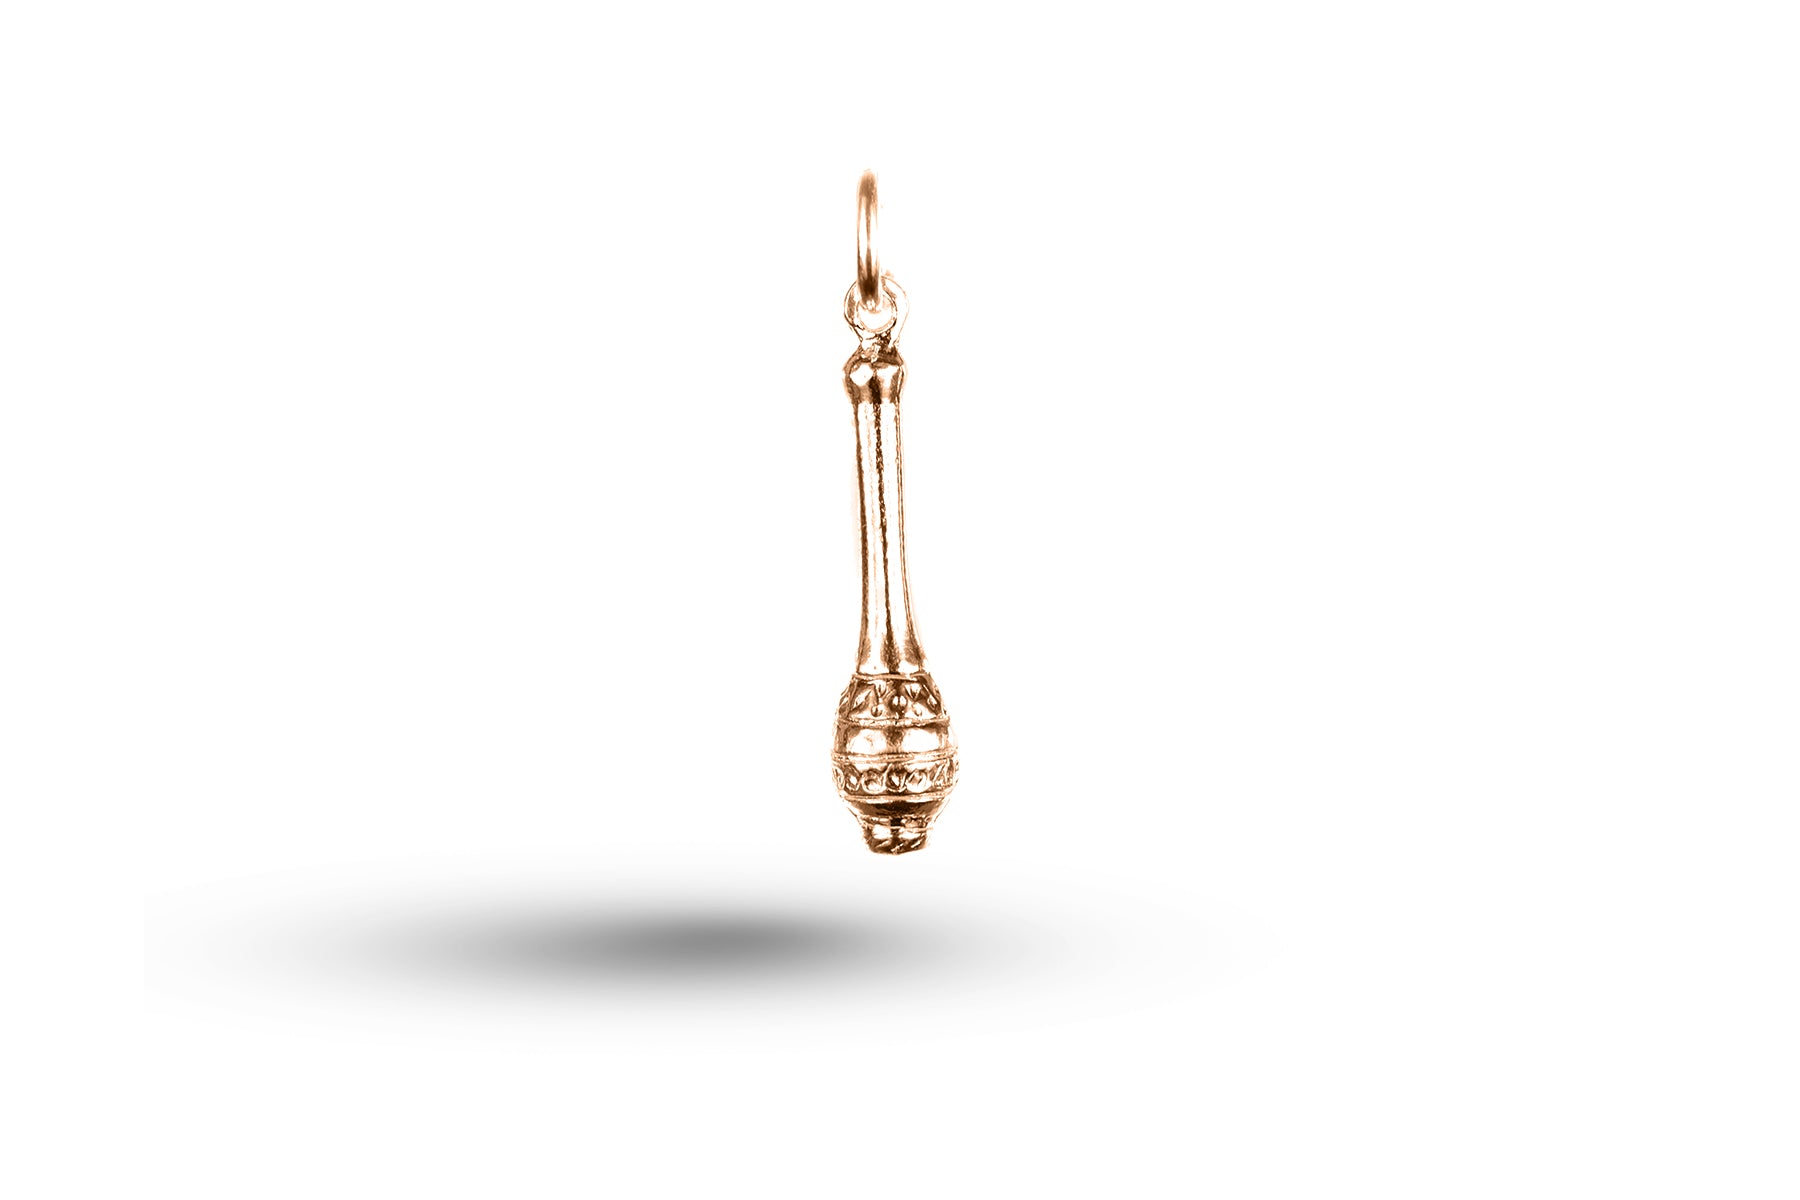 Luxury rose gold baby rattle charm.